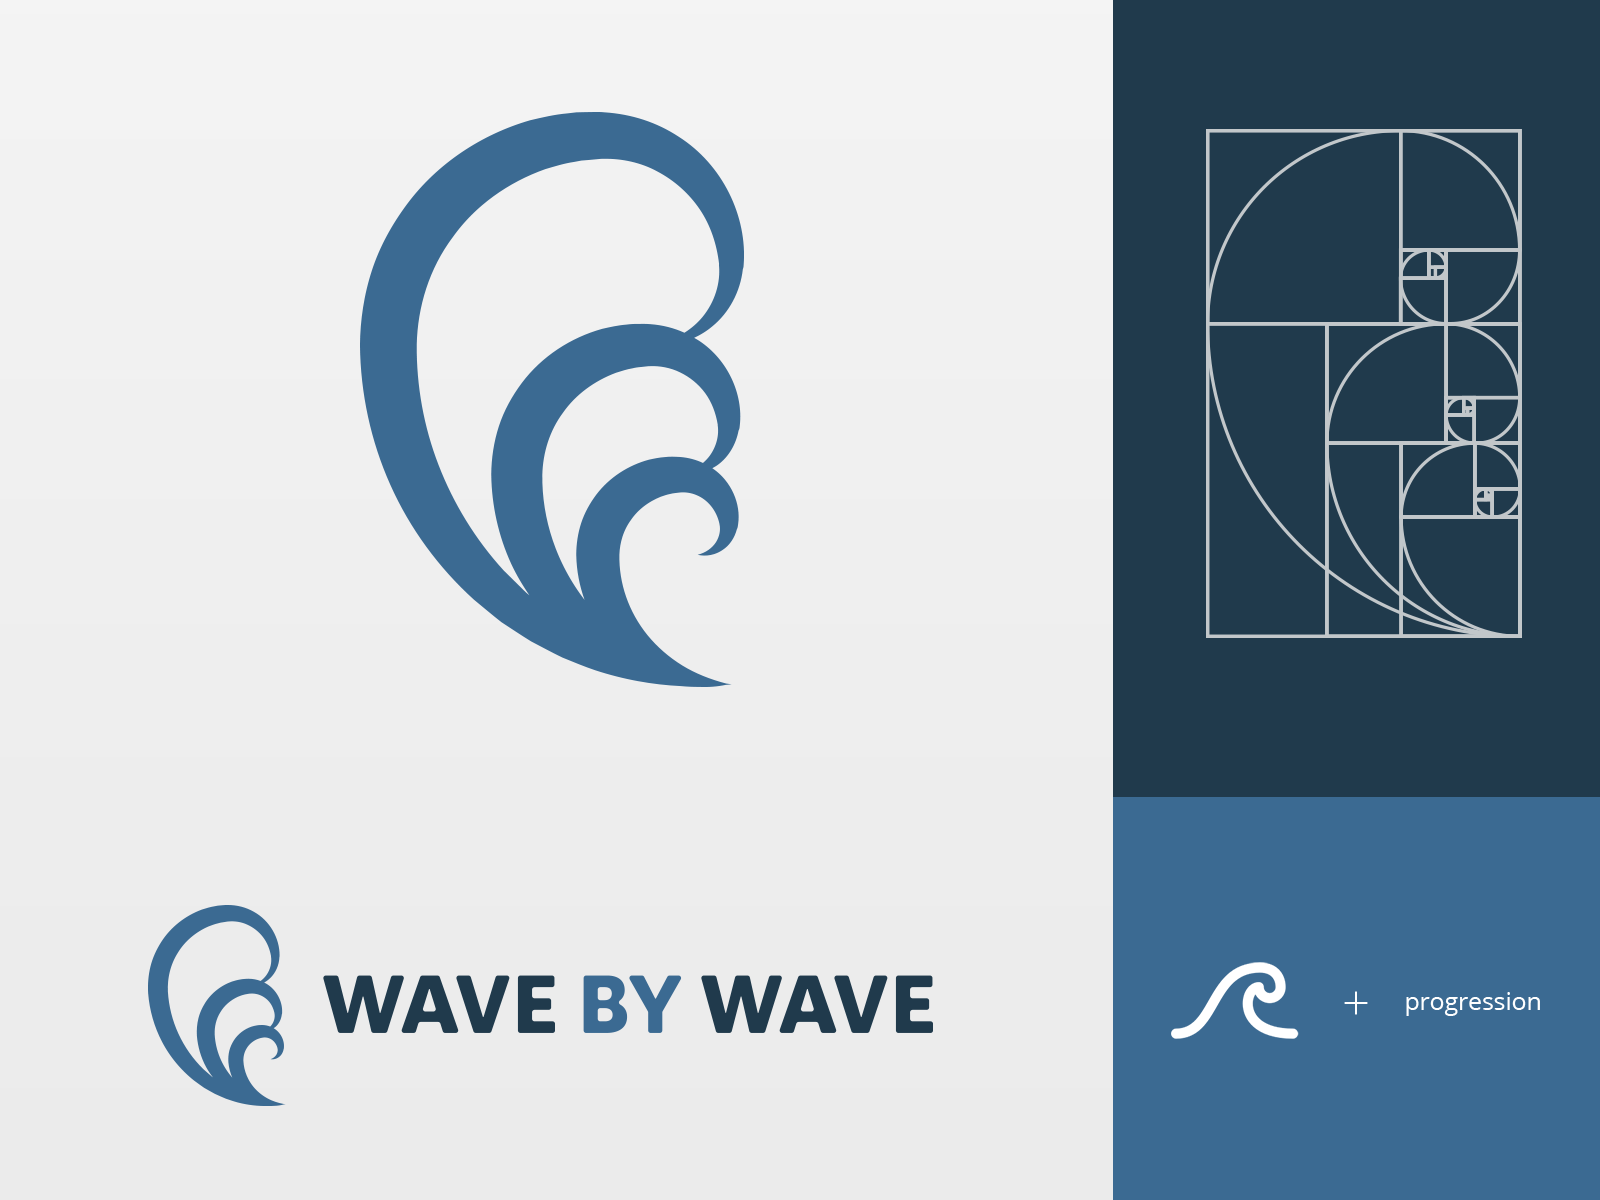 Logo - wave by wave by Henrique Berthier on Dribbble